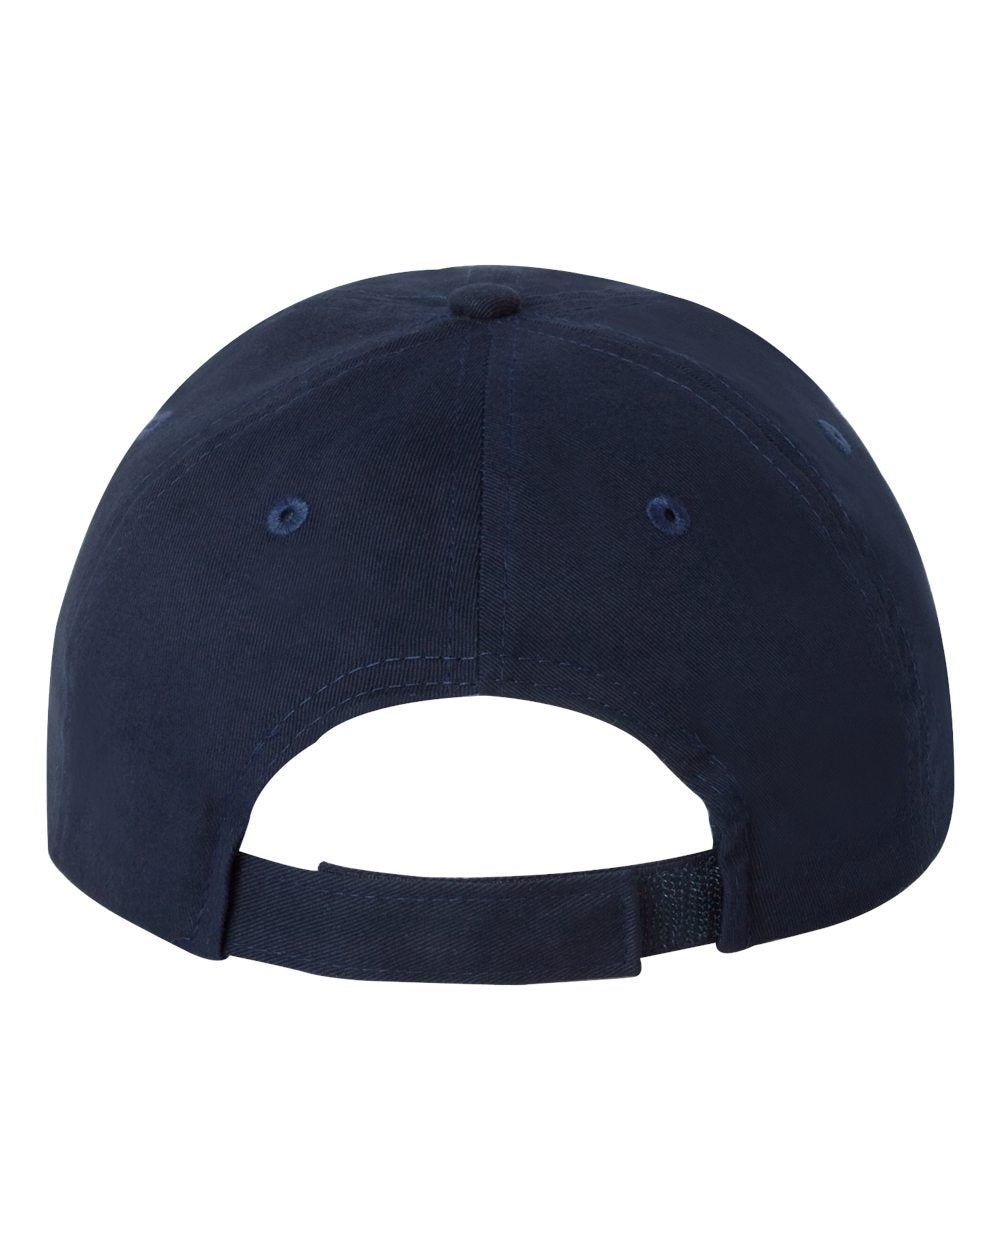 Adult Brushed Twill Cap, Navy